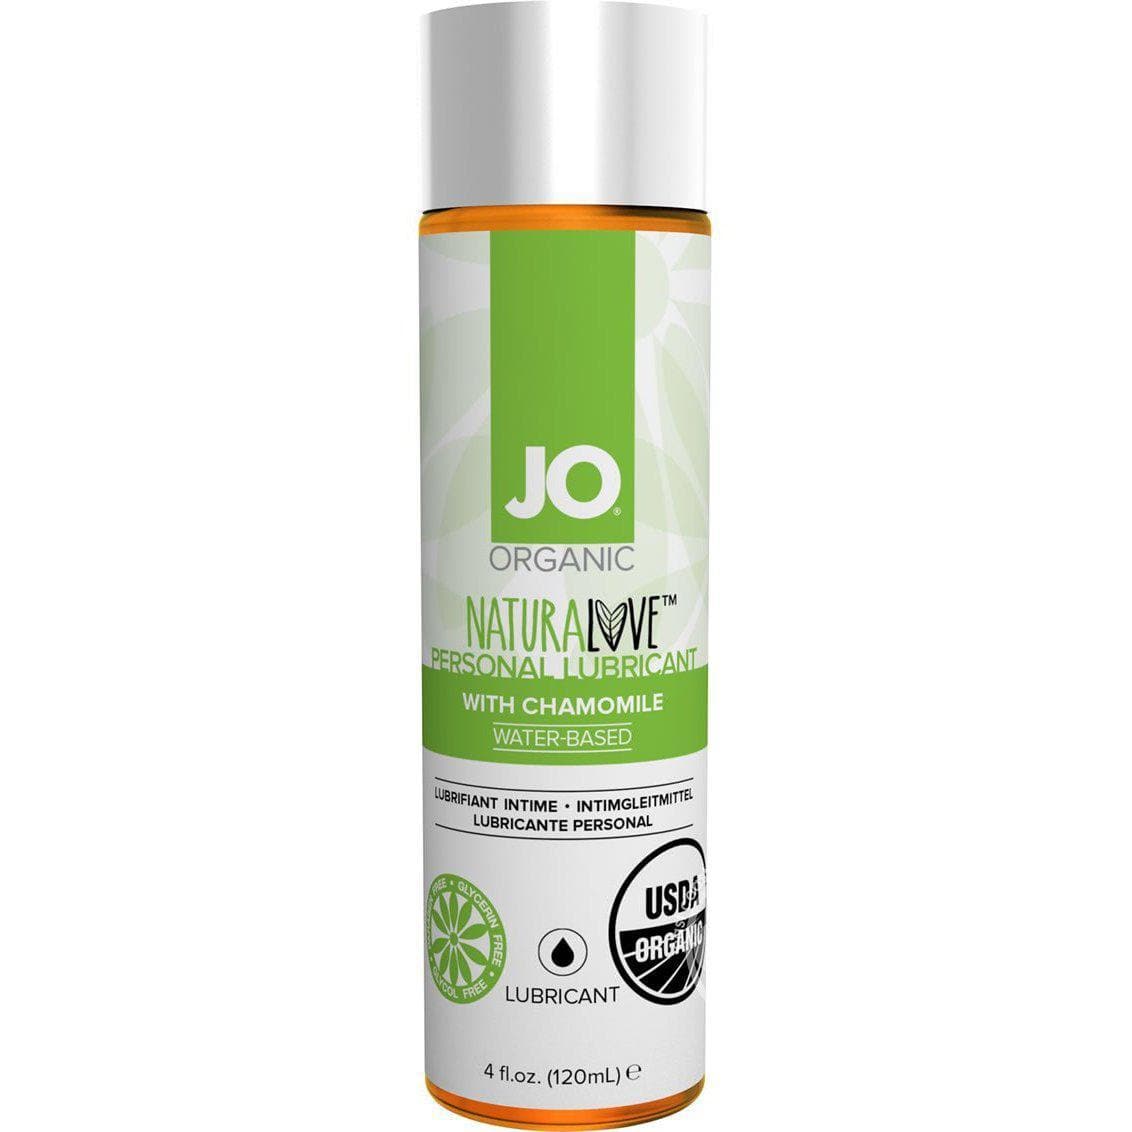 JO Organic Naturalove Personal Waterbased Lubricant With Chamomile - Romantic Blessings